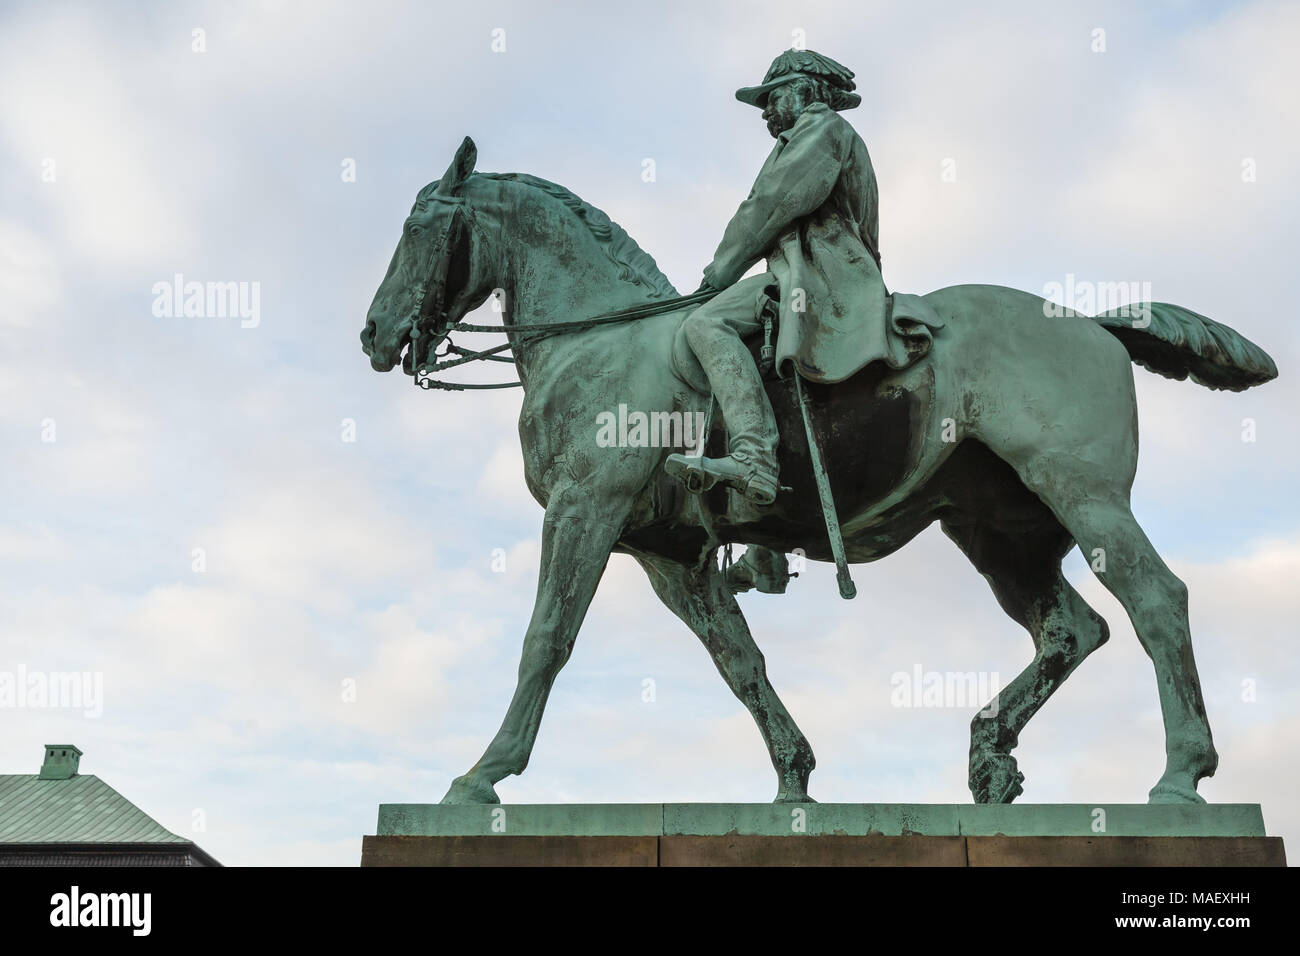 Equestrian statue of King Christian IX of Denmark is located at the Christiansborg Palace in Copenhagen, Denmark. Stock Photo